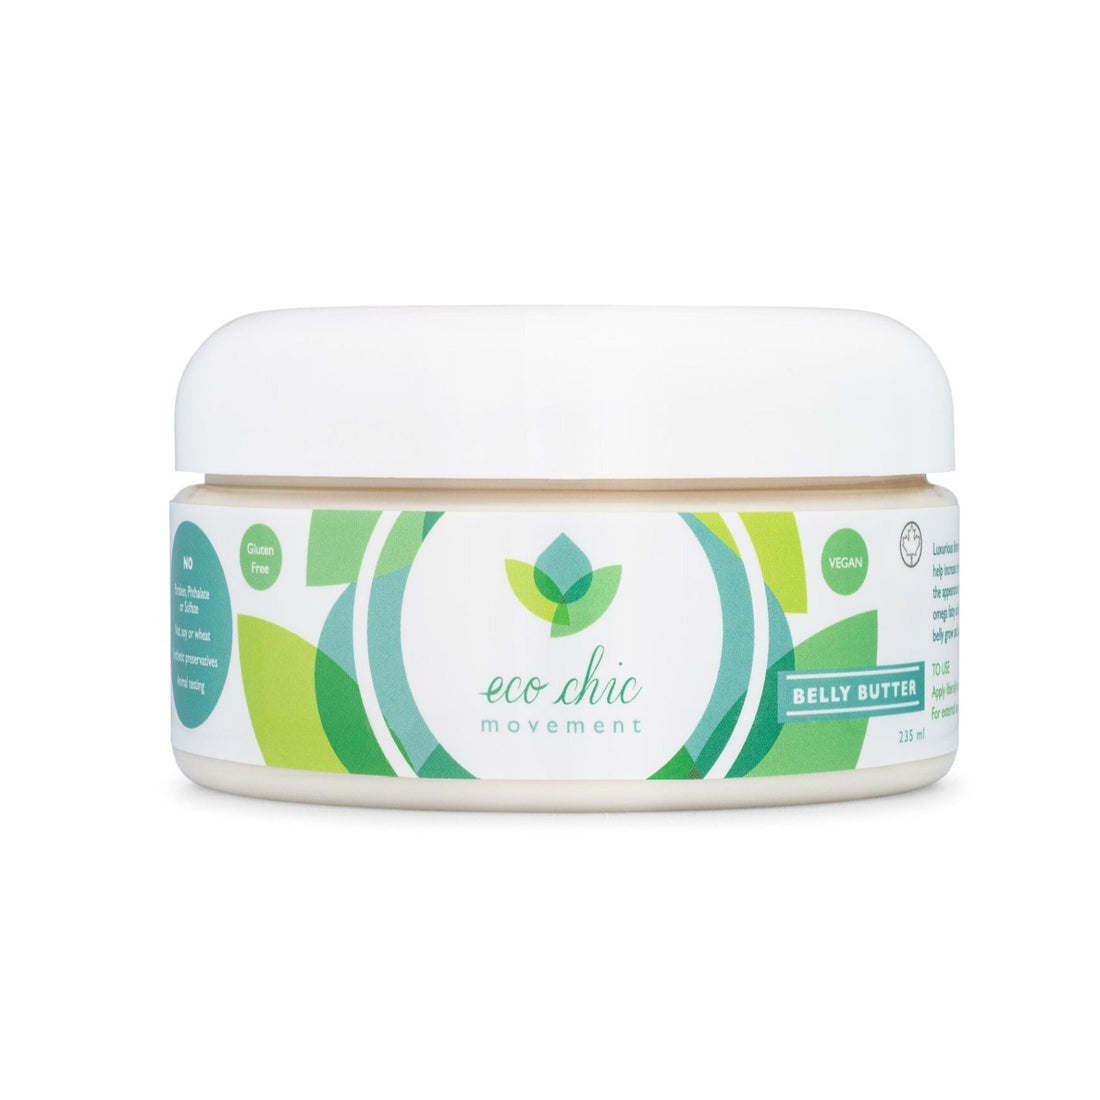 a tub of handmade, vegan, natural belly butter for pregnancy stretch marks from Eco Chic Movement